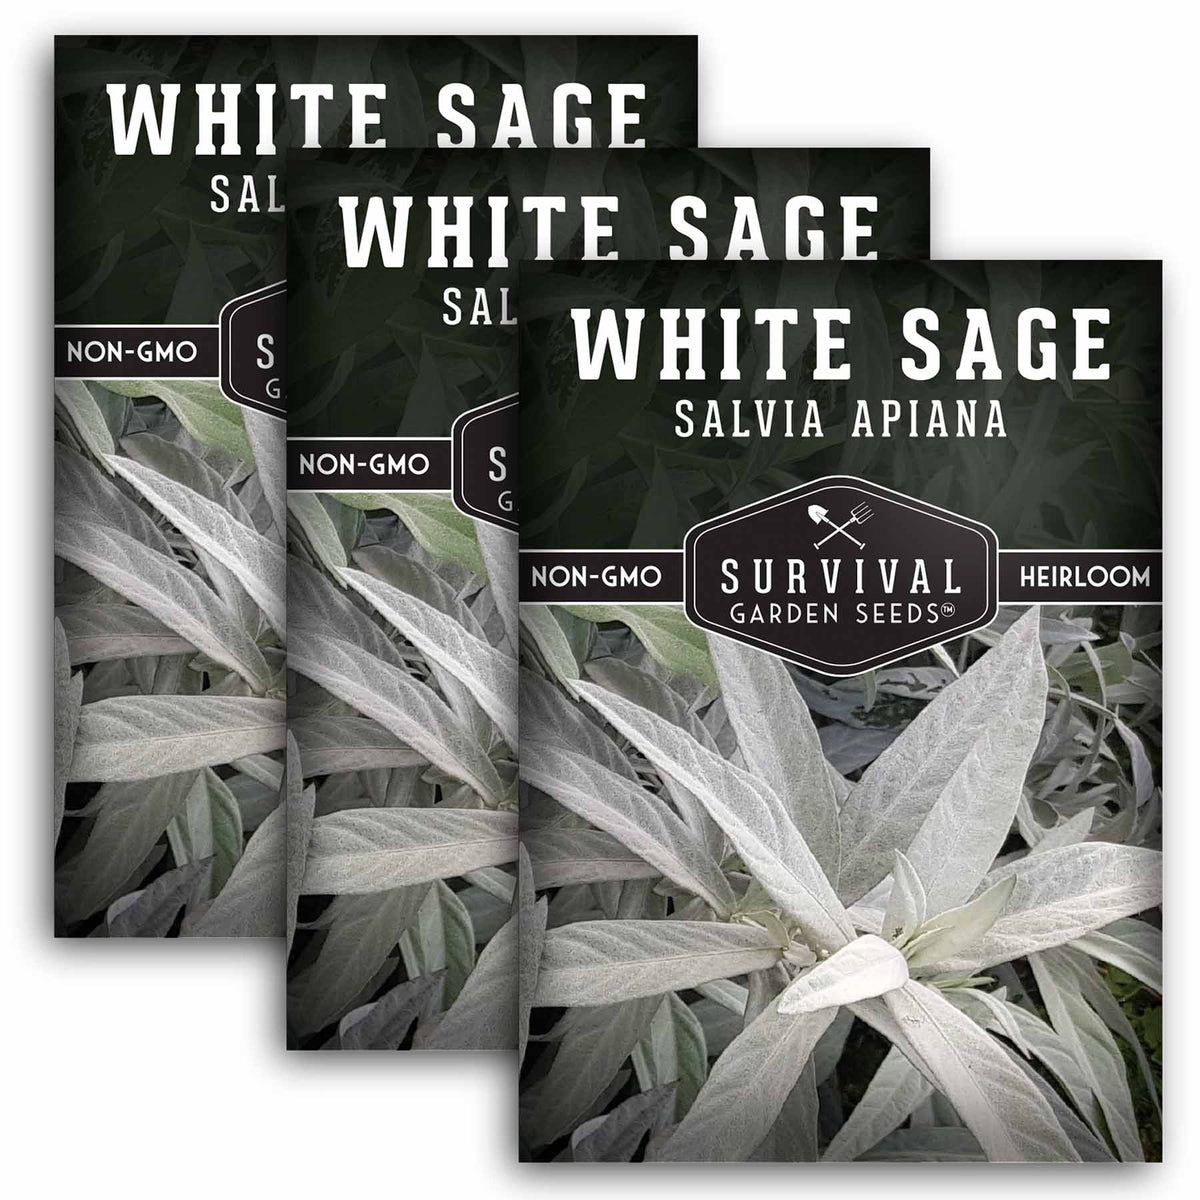 3 packets of White Sage Seeds